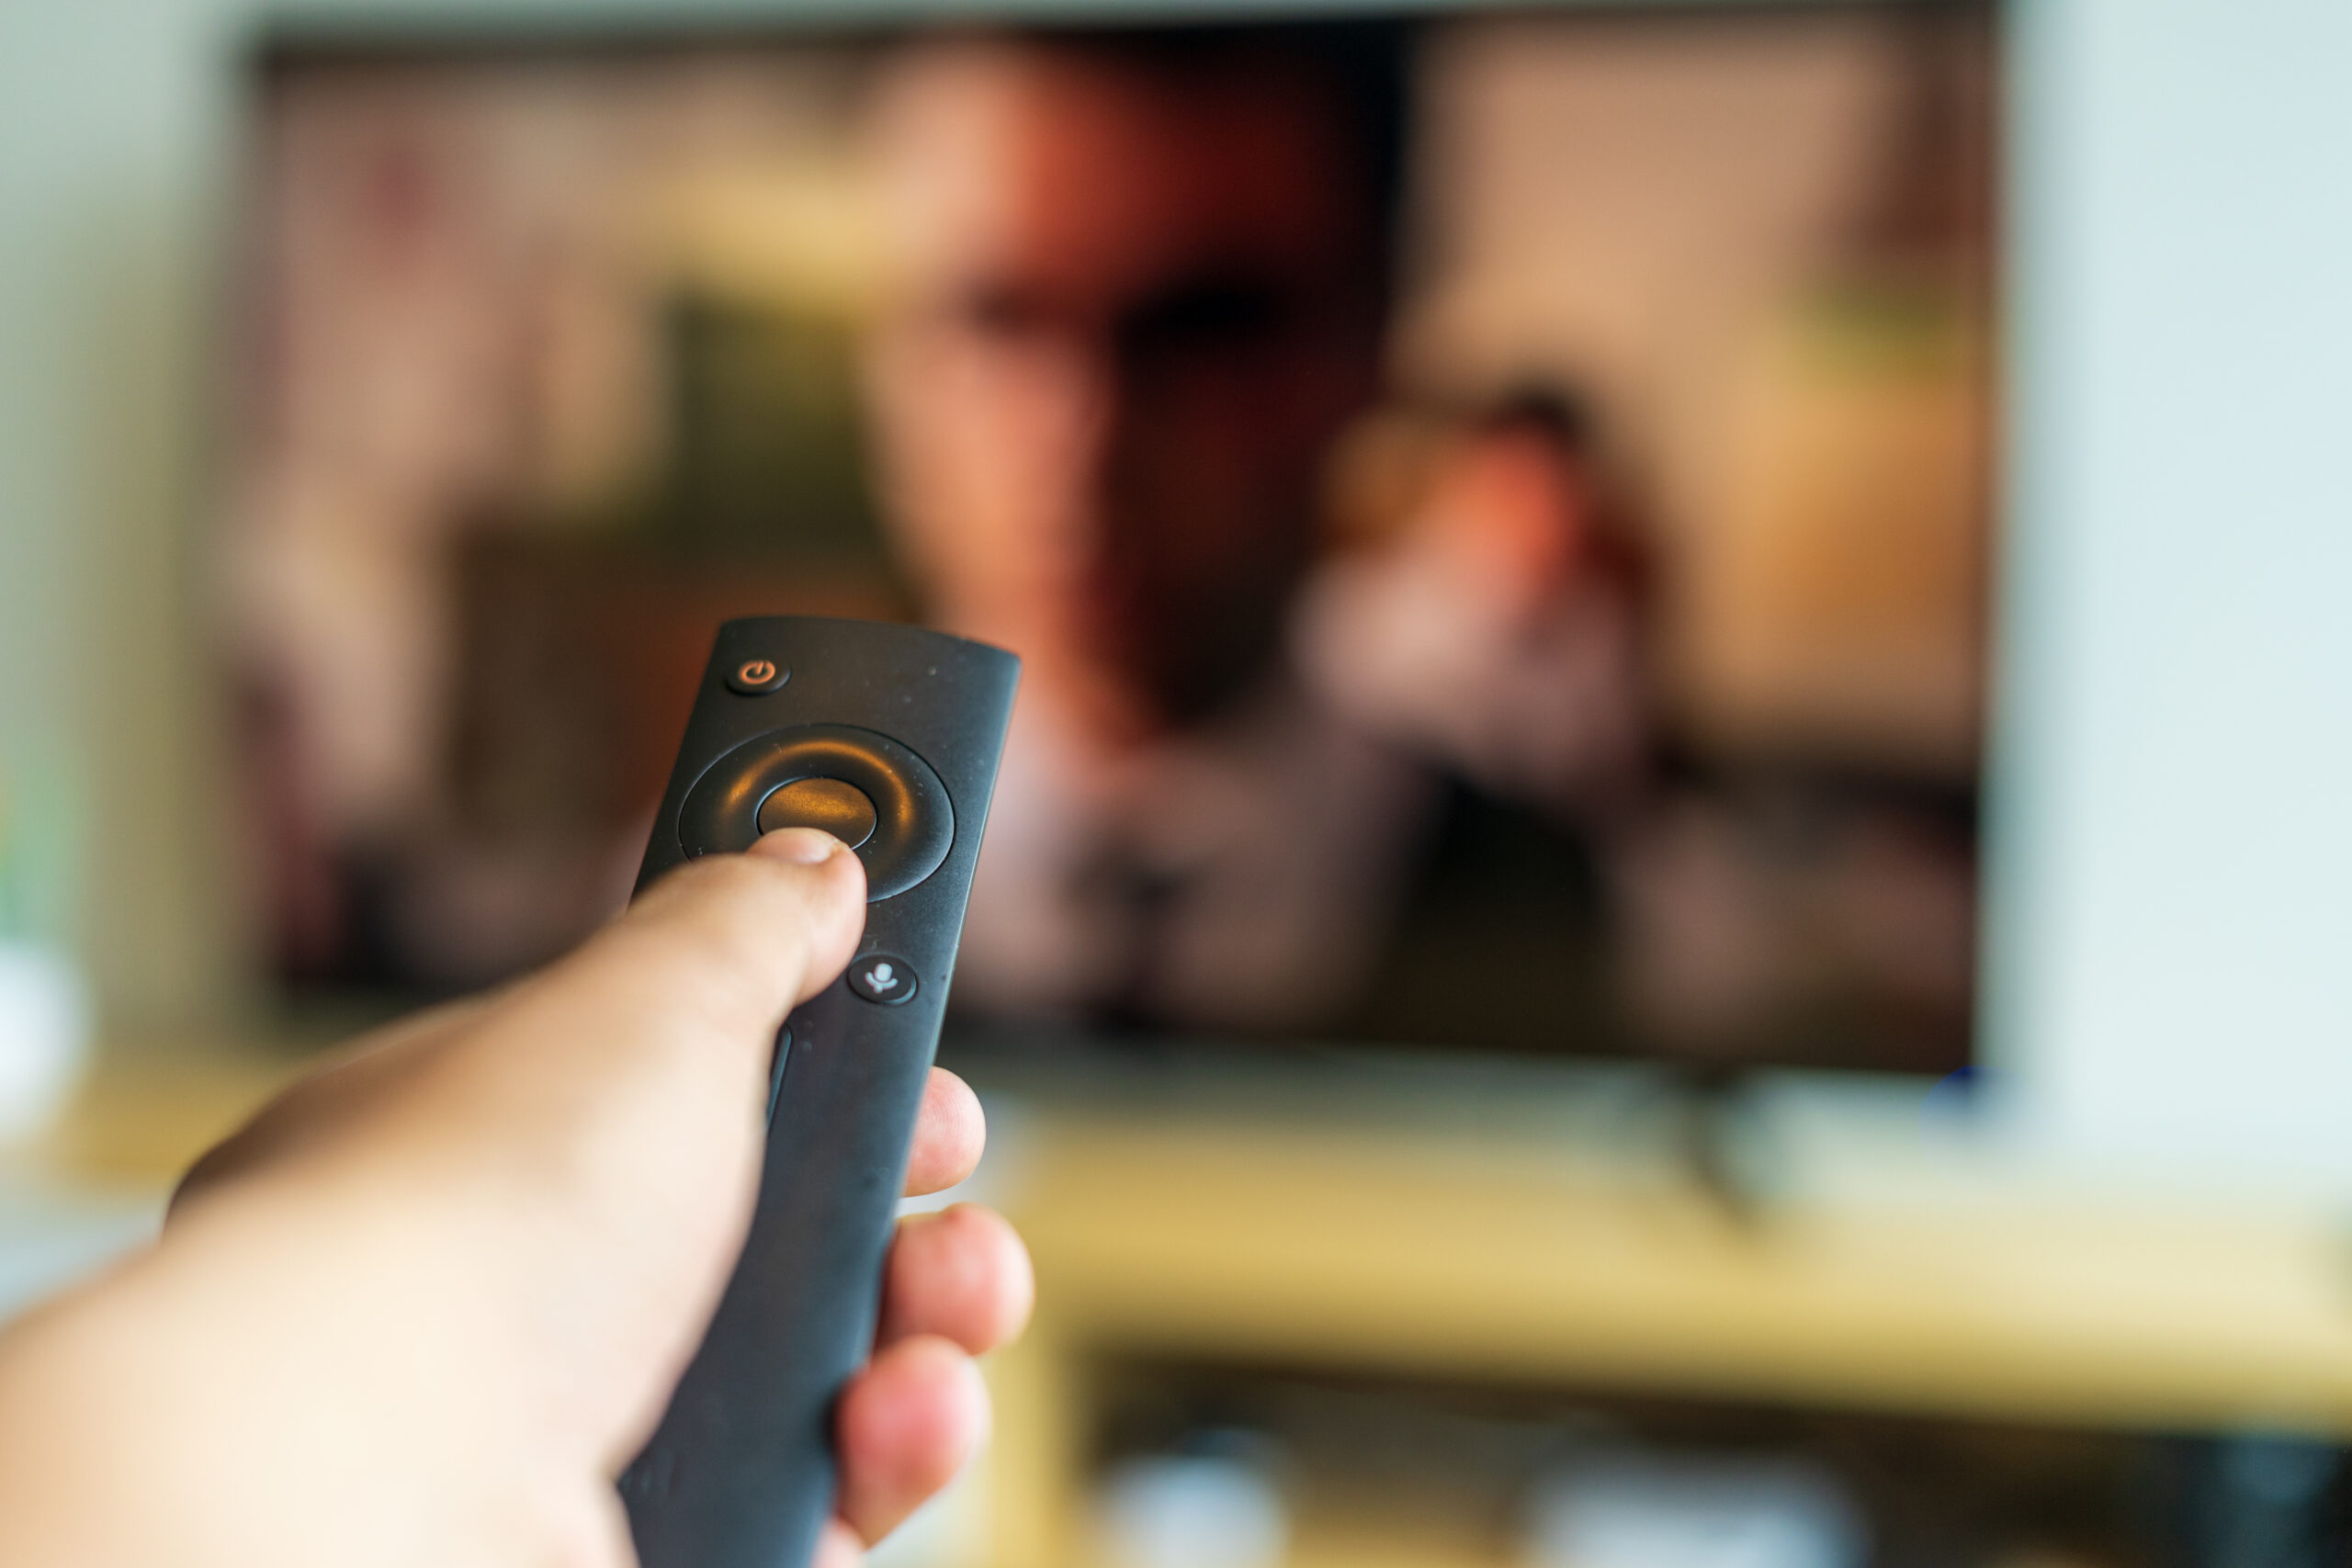 How To Connect Chromecast To Hotel WiFi